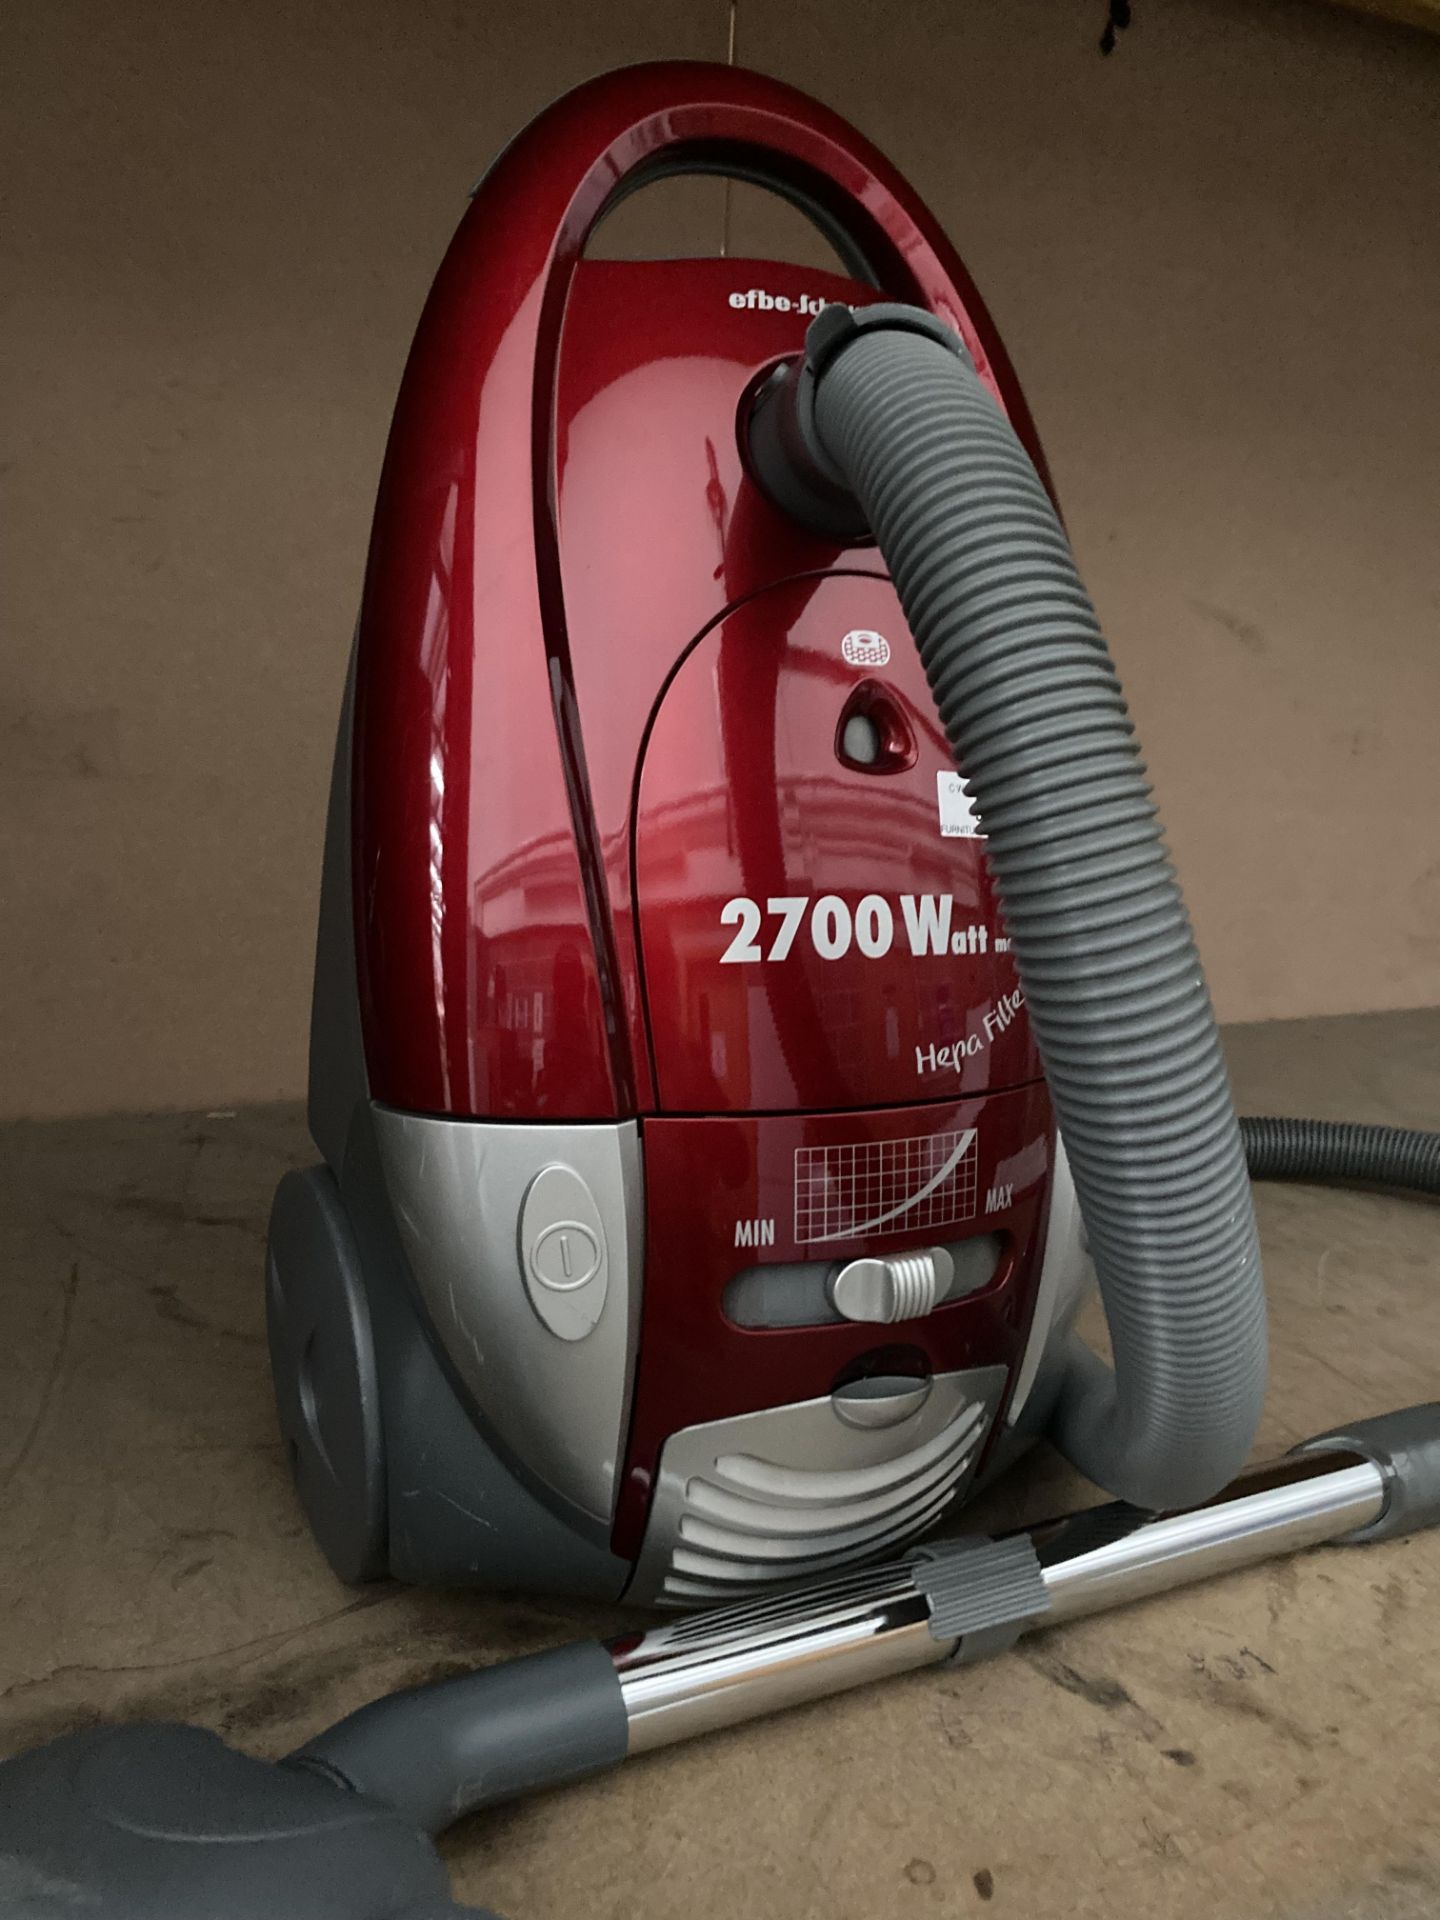 An Efbe-Schott 2700 watt max Hepa Filter vacuum cleaner complete with hose and attachment